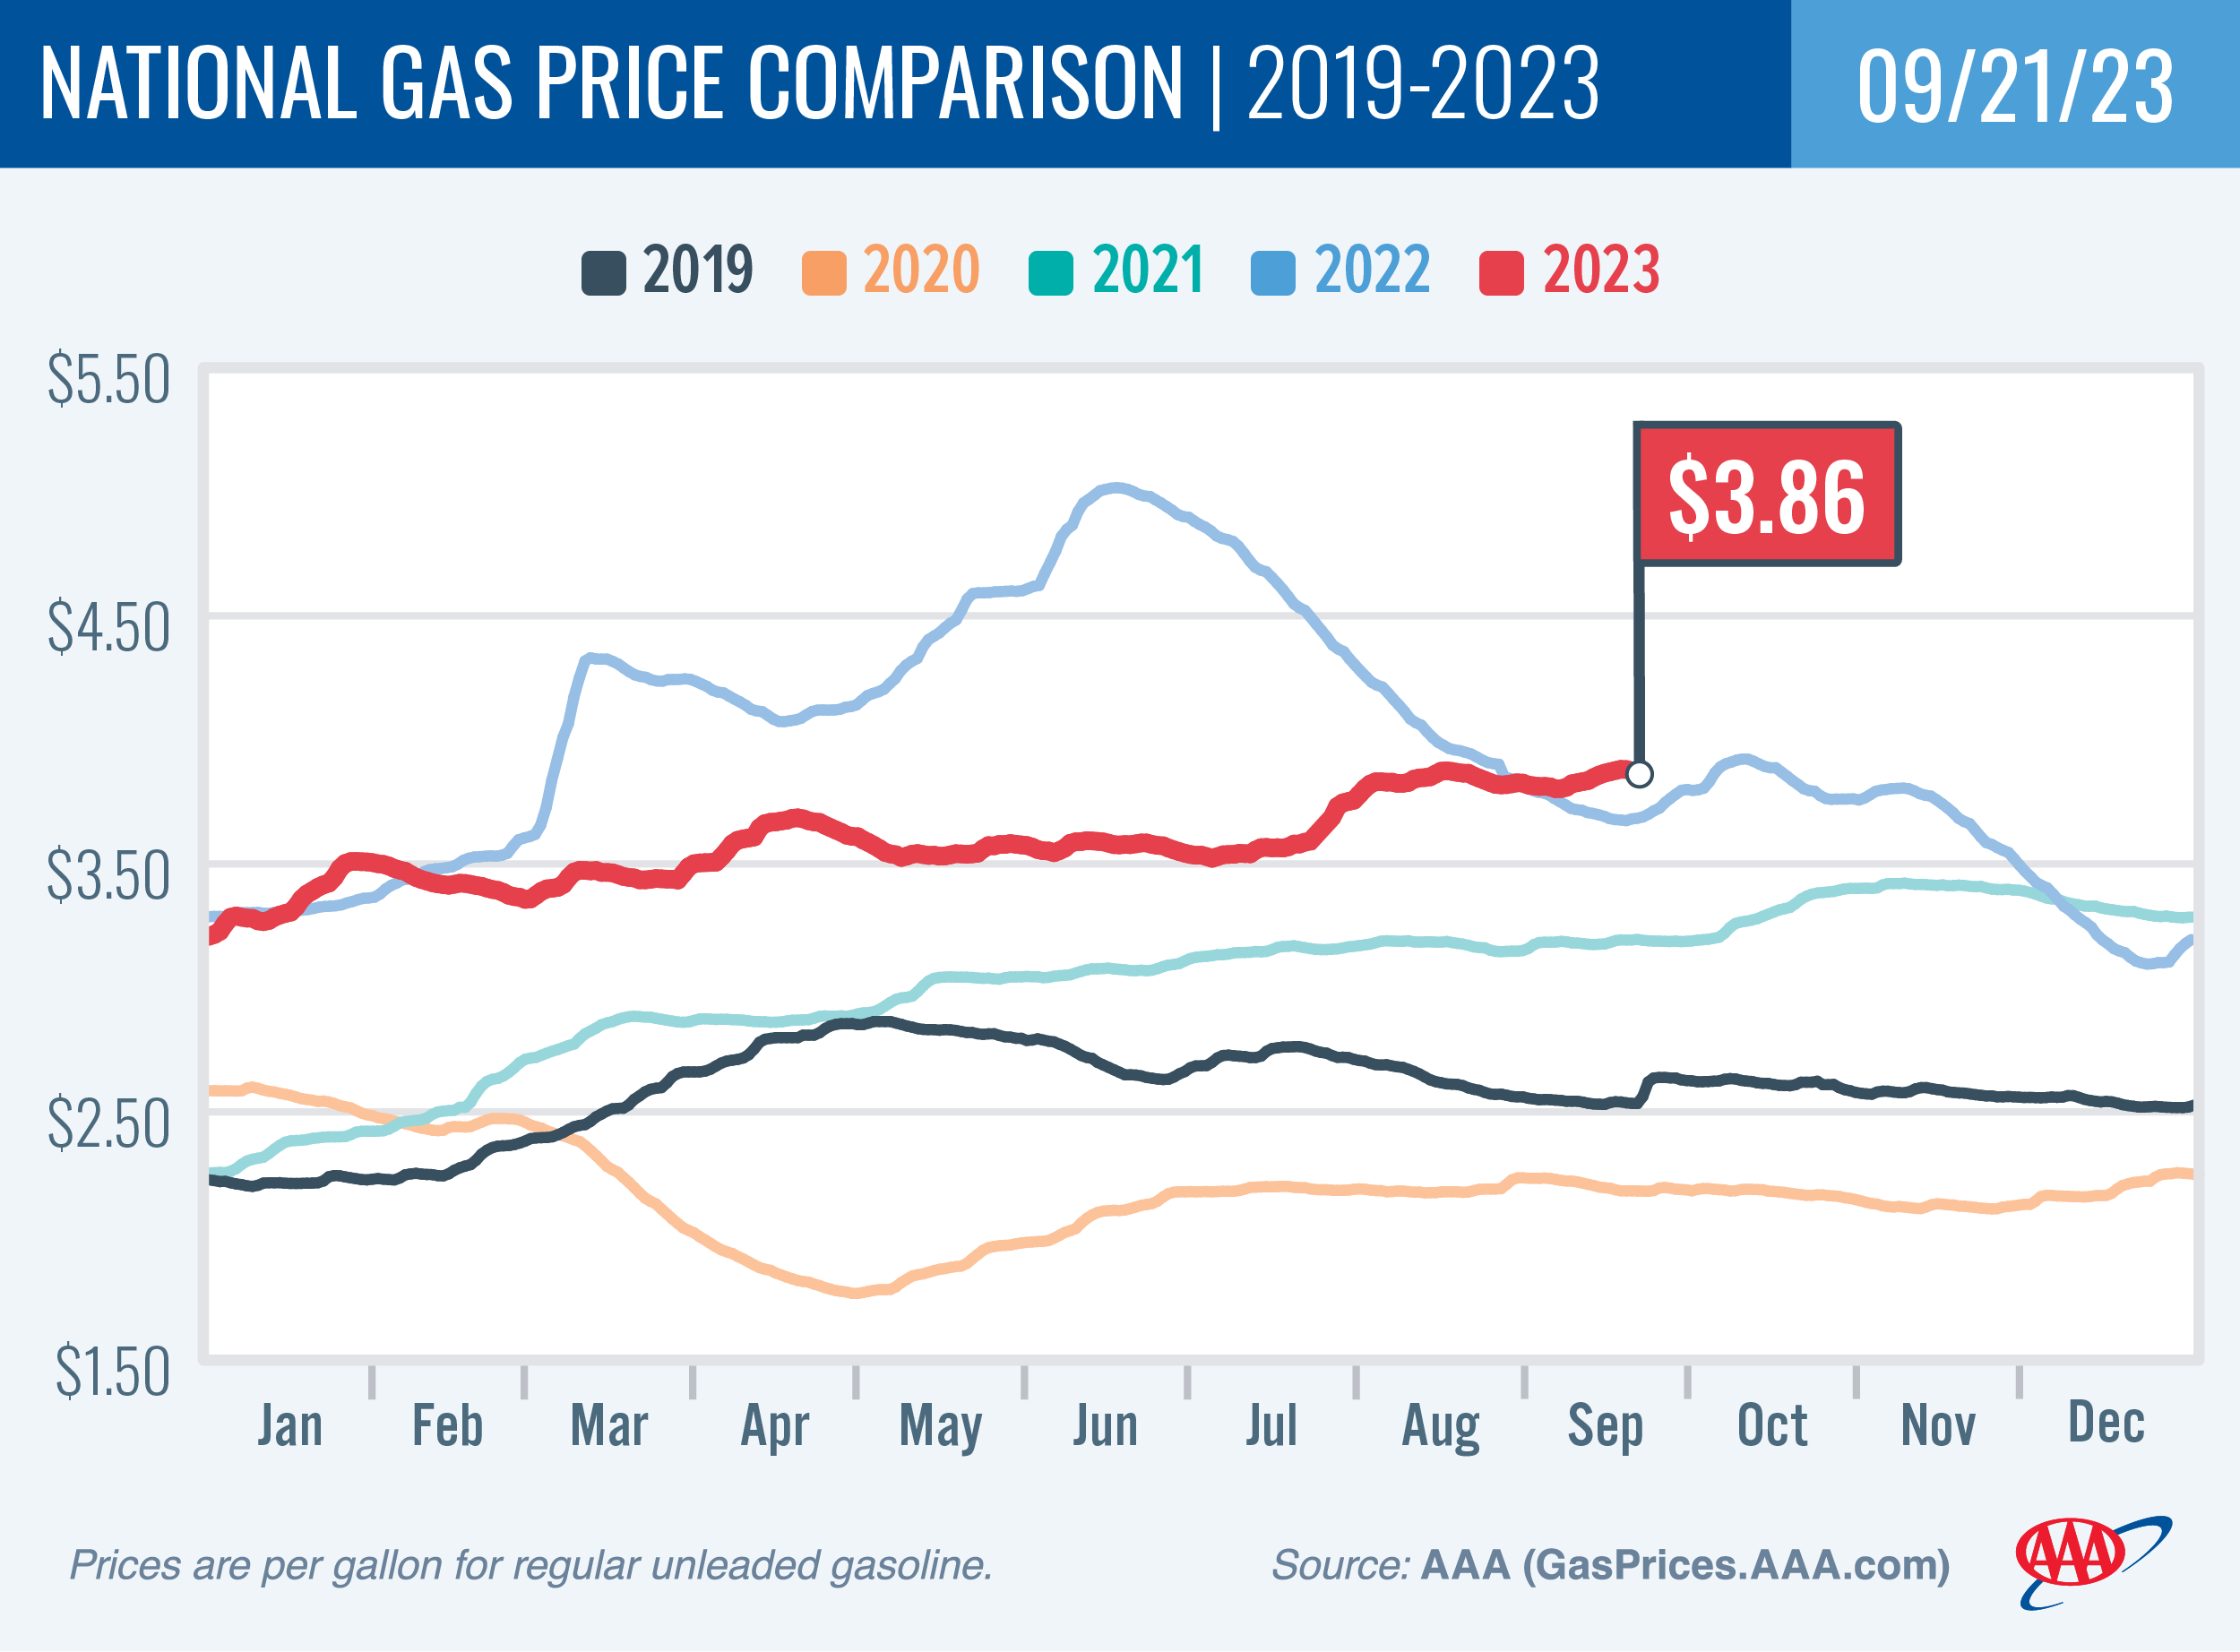 National Gas Price Comparison for September 21, 2023